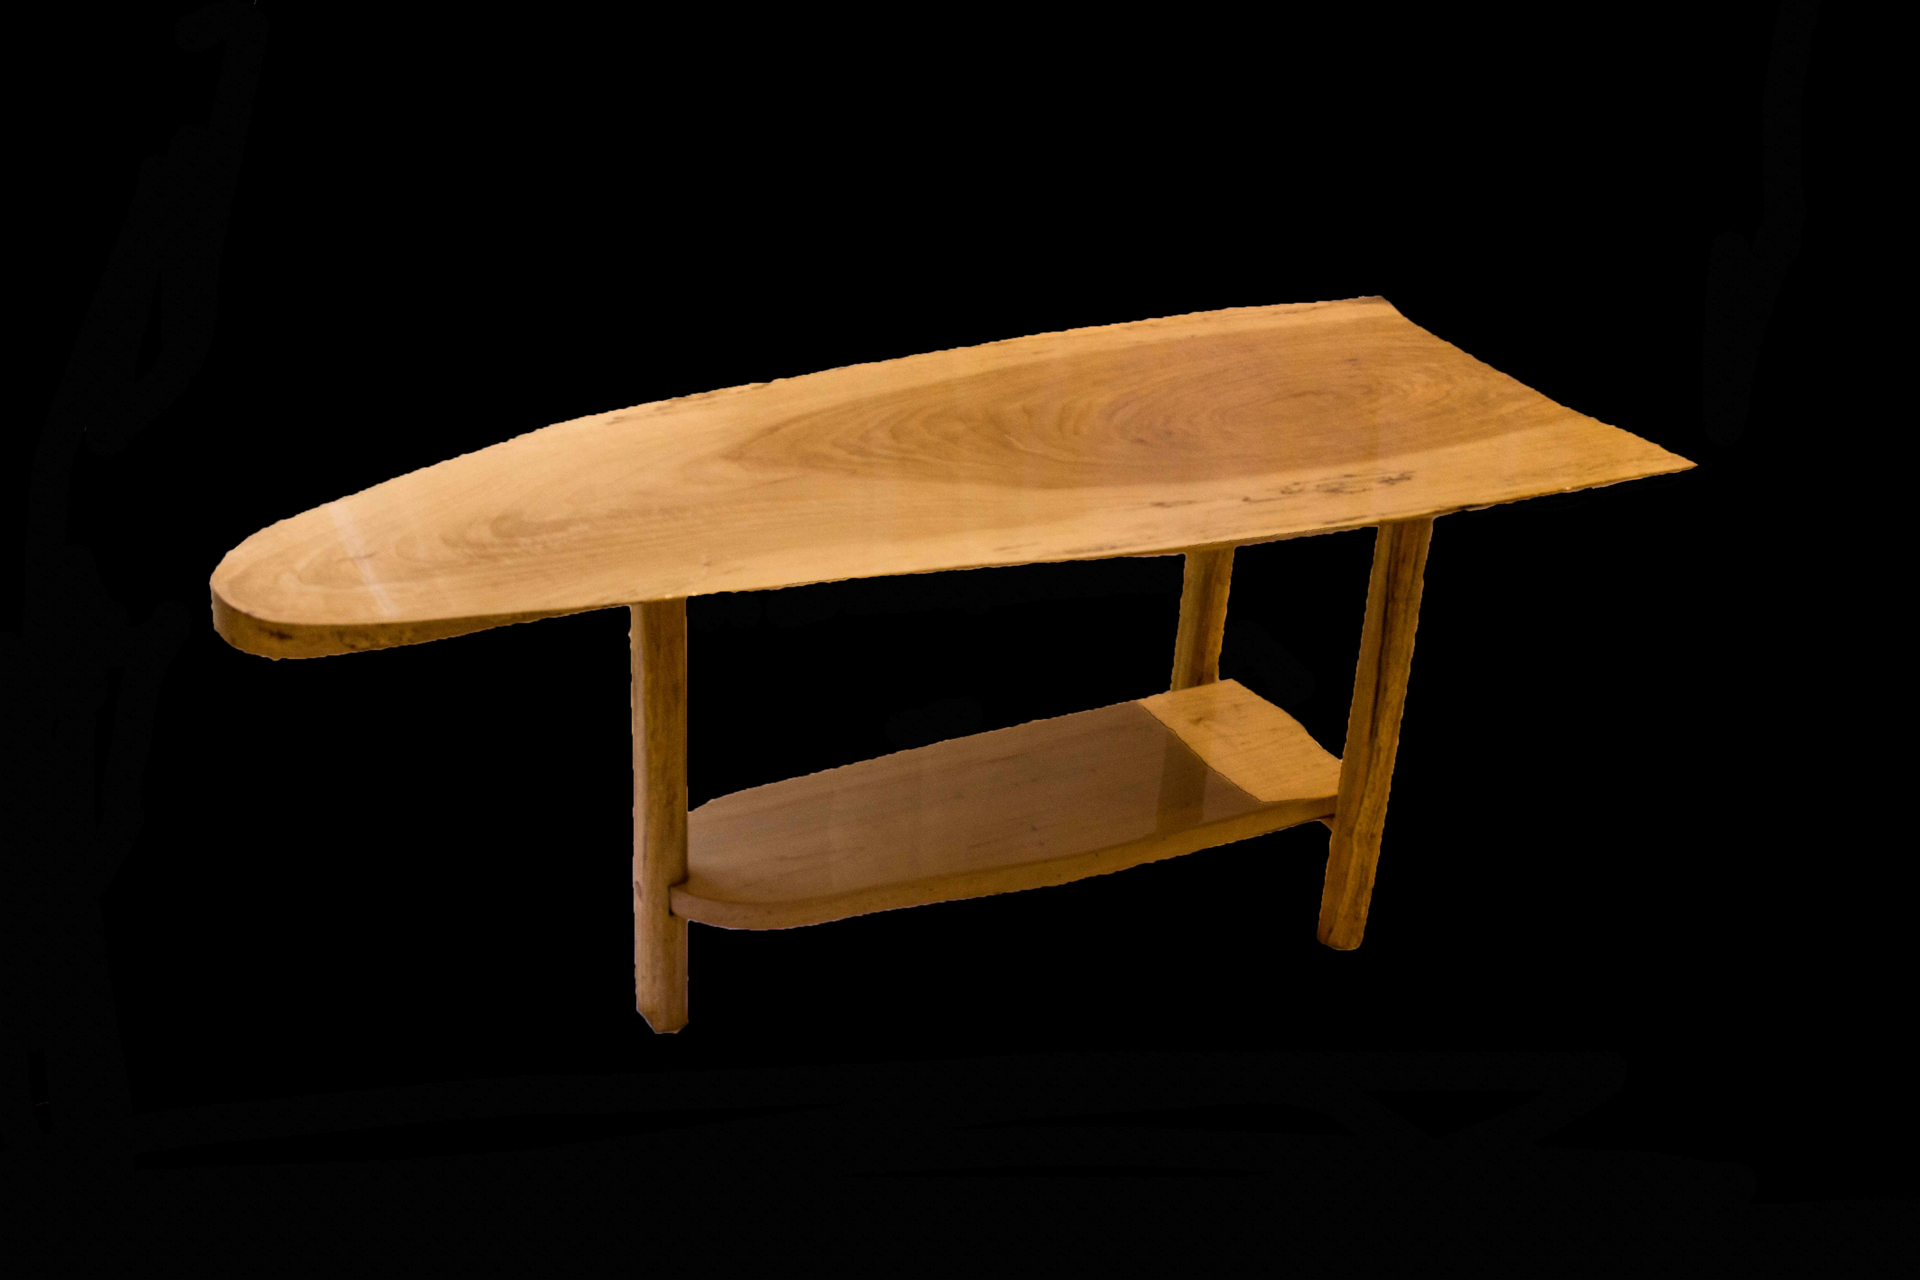 Light Natural Spalted Maple Table by Jerry Kienke